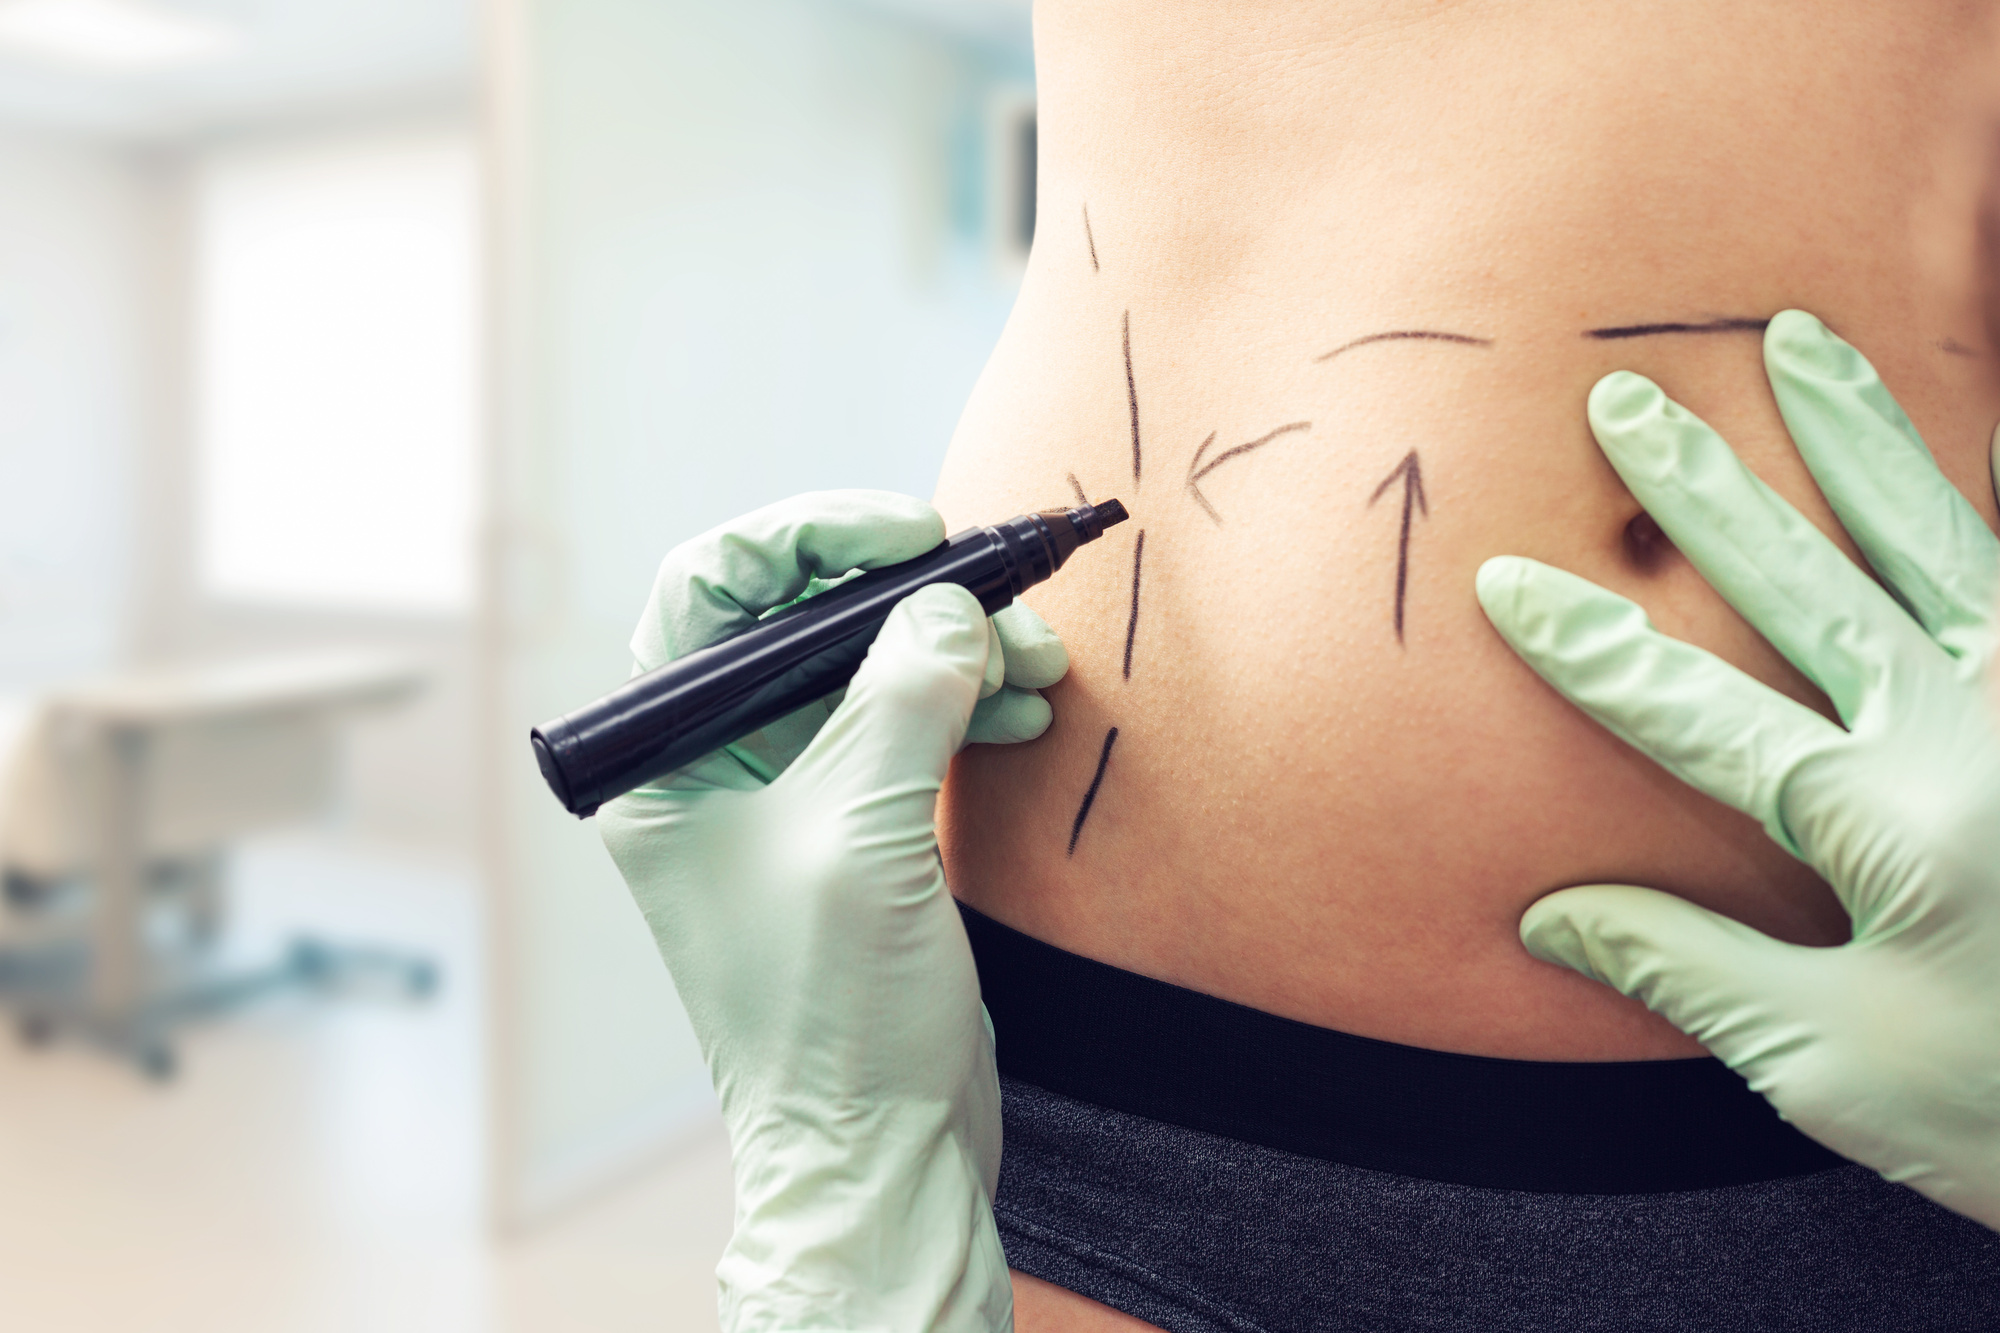 Confused if you need a tummy tuck or liposuction? Don't worry! We've got all the information you need to make the right decision here.